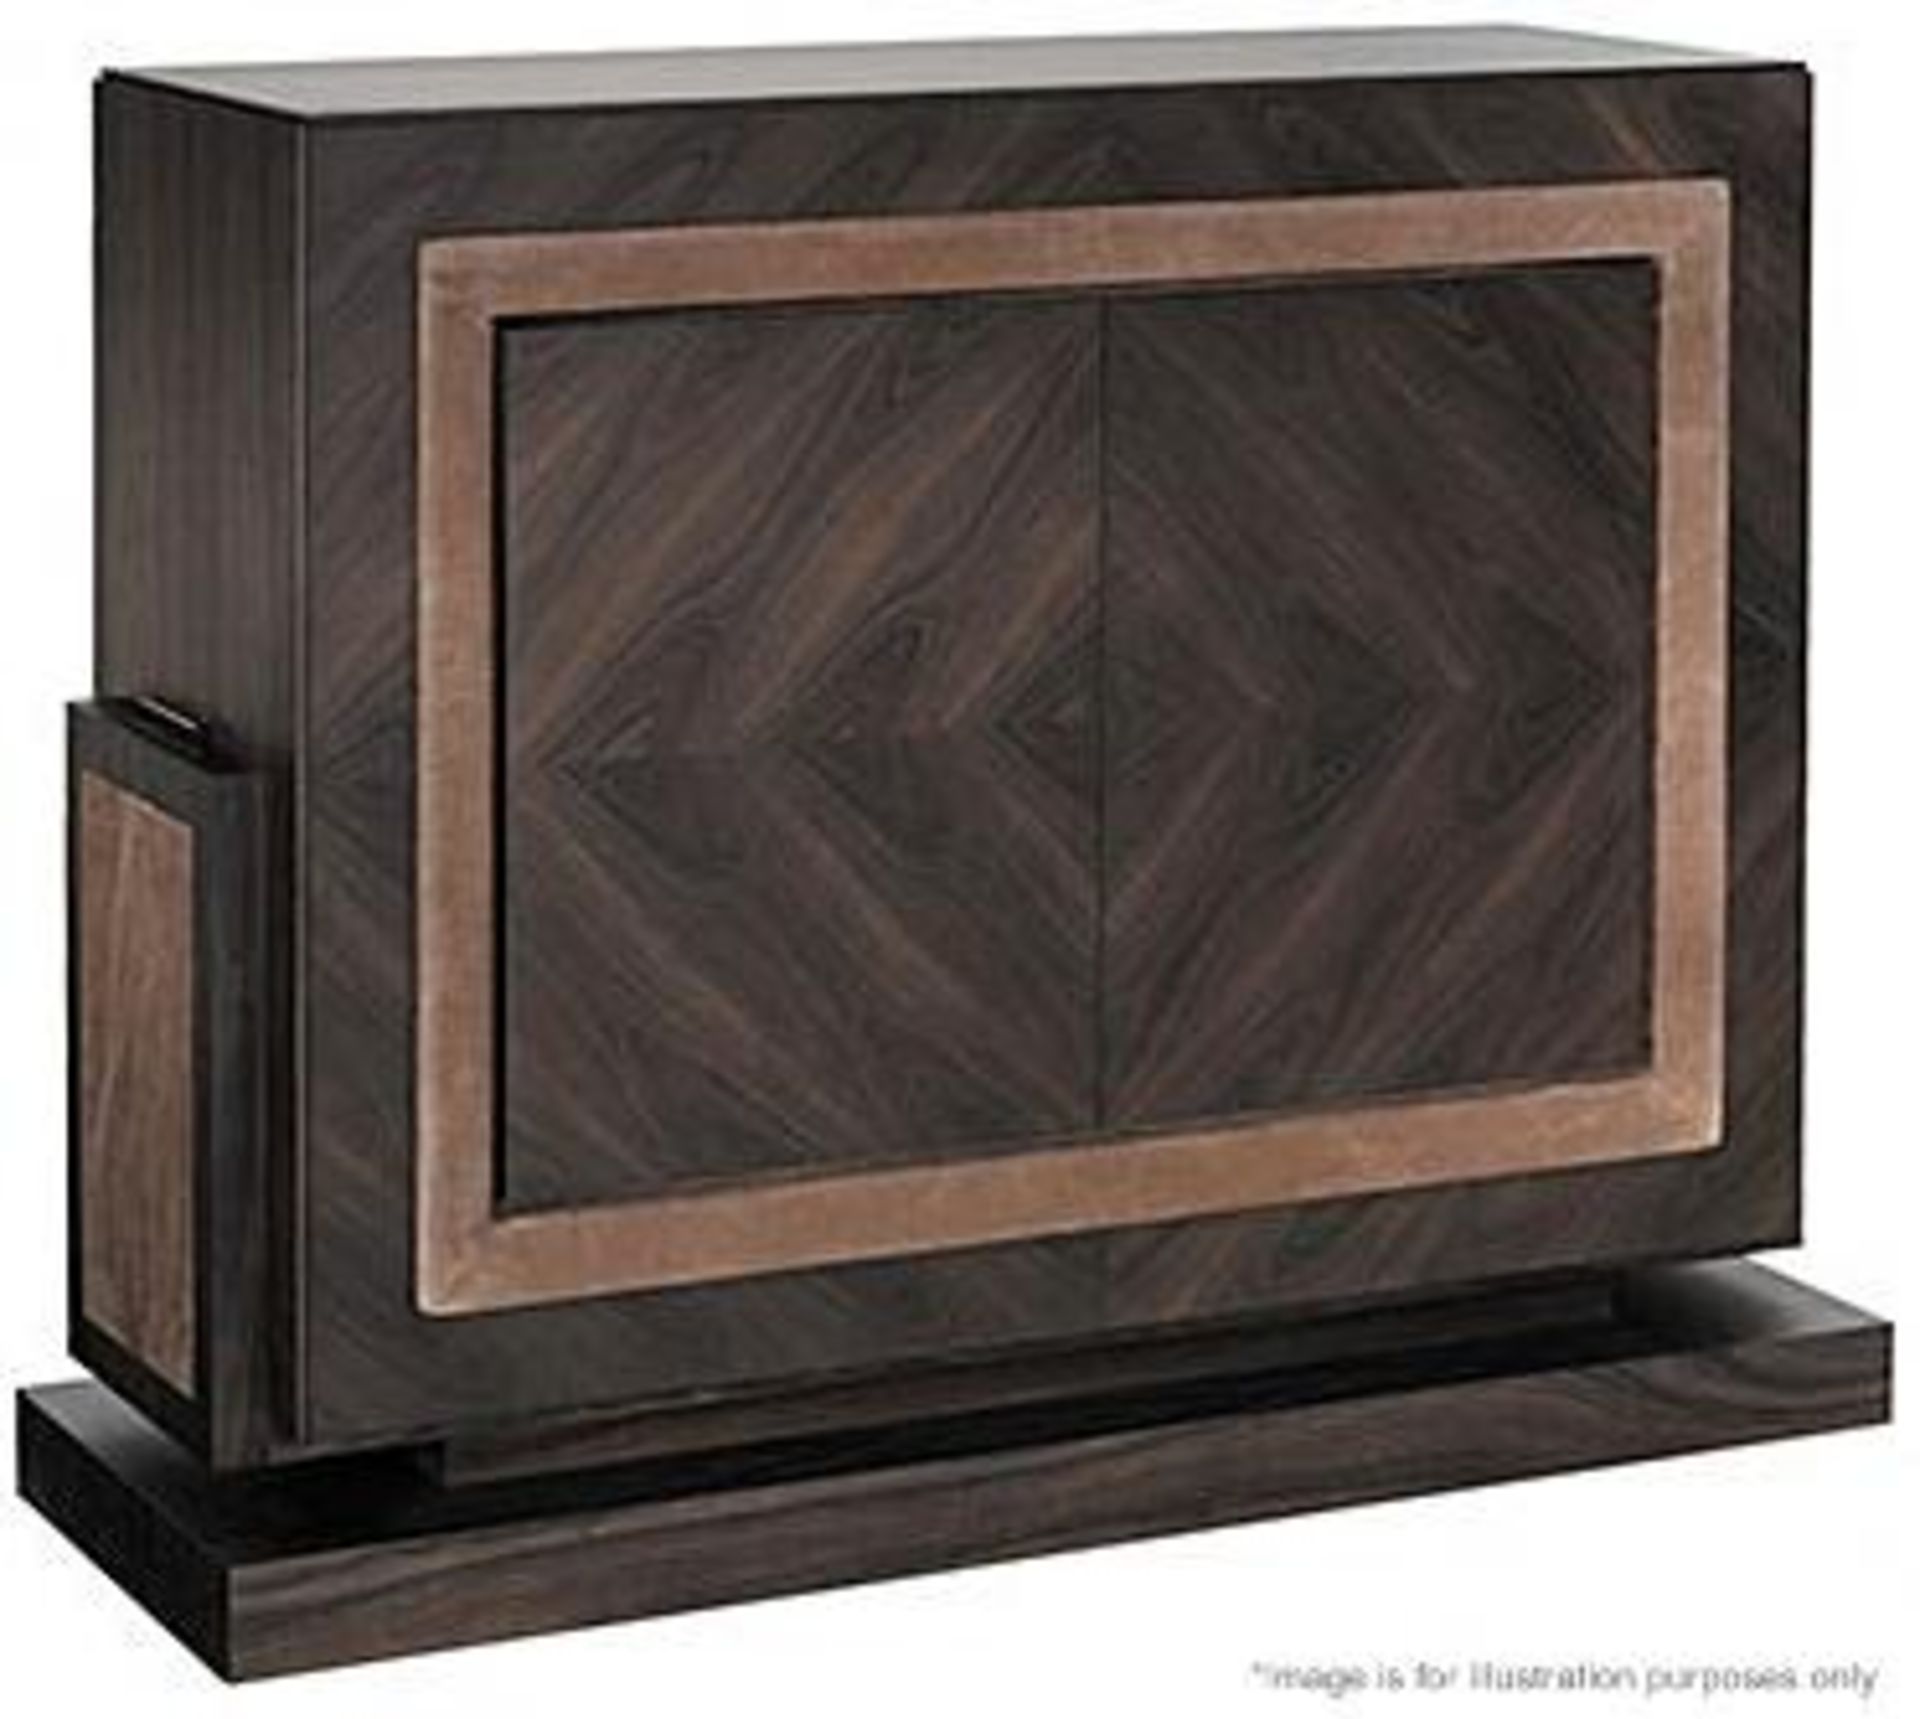 1 x SMANIA 'Efeso' Luxury Bar Unit In Burr Walnut With Leather Upholstery In 'Florida Beige' - Image 6 of 19